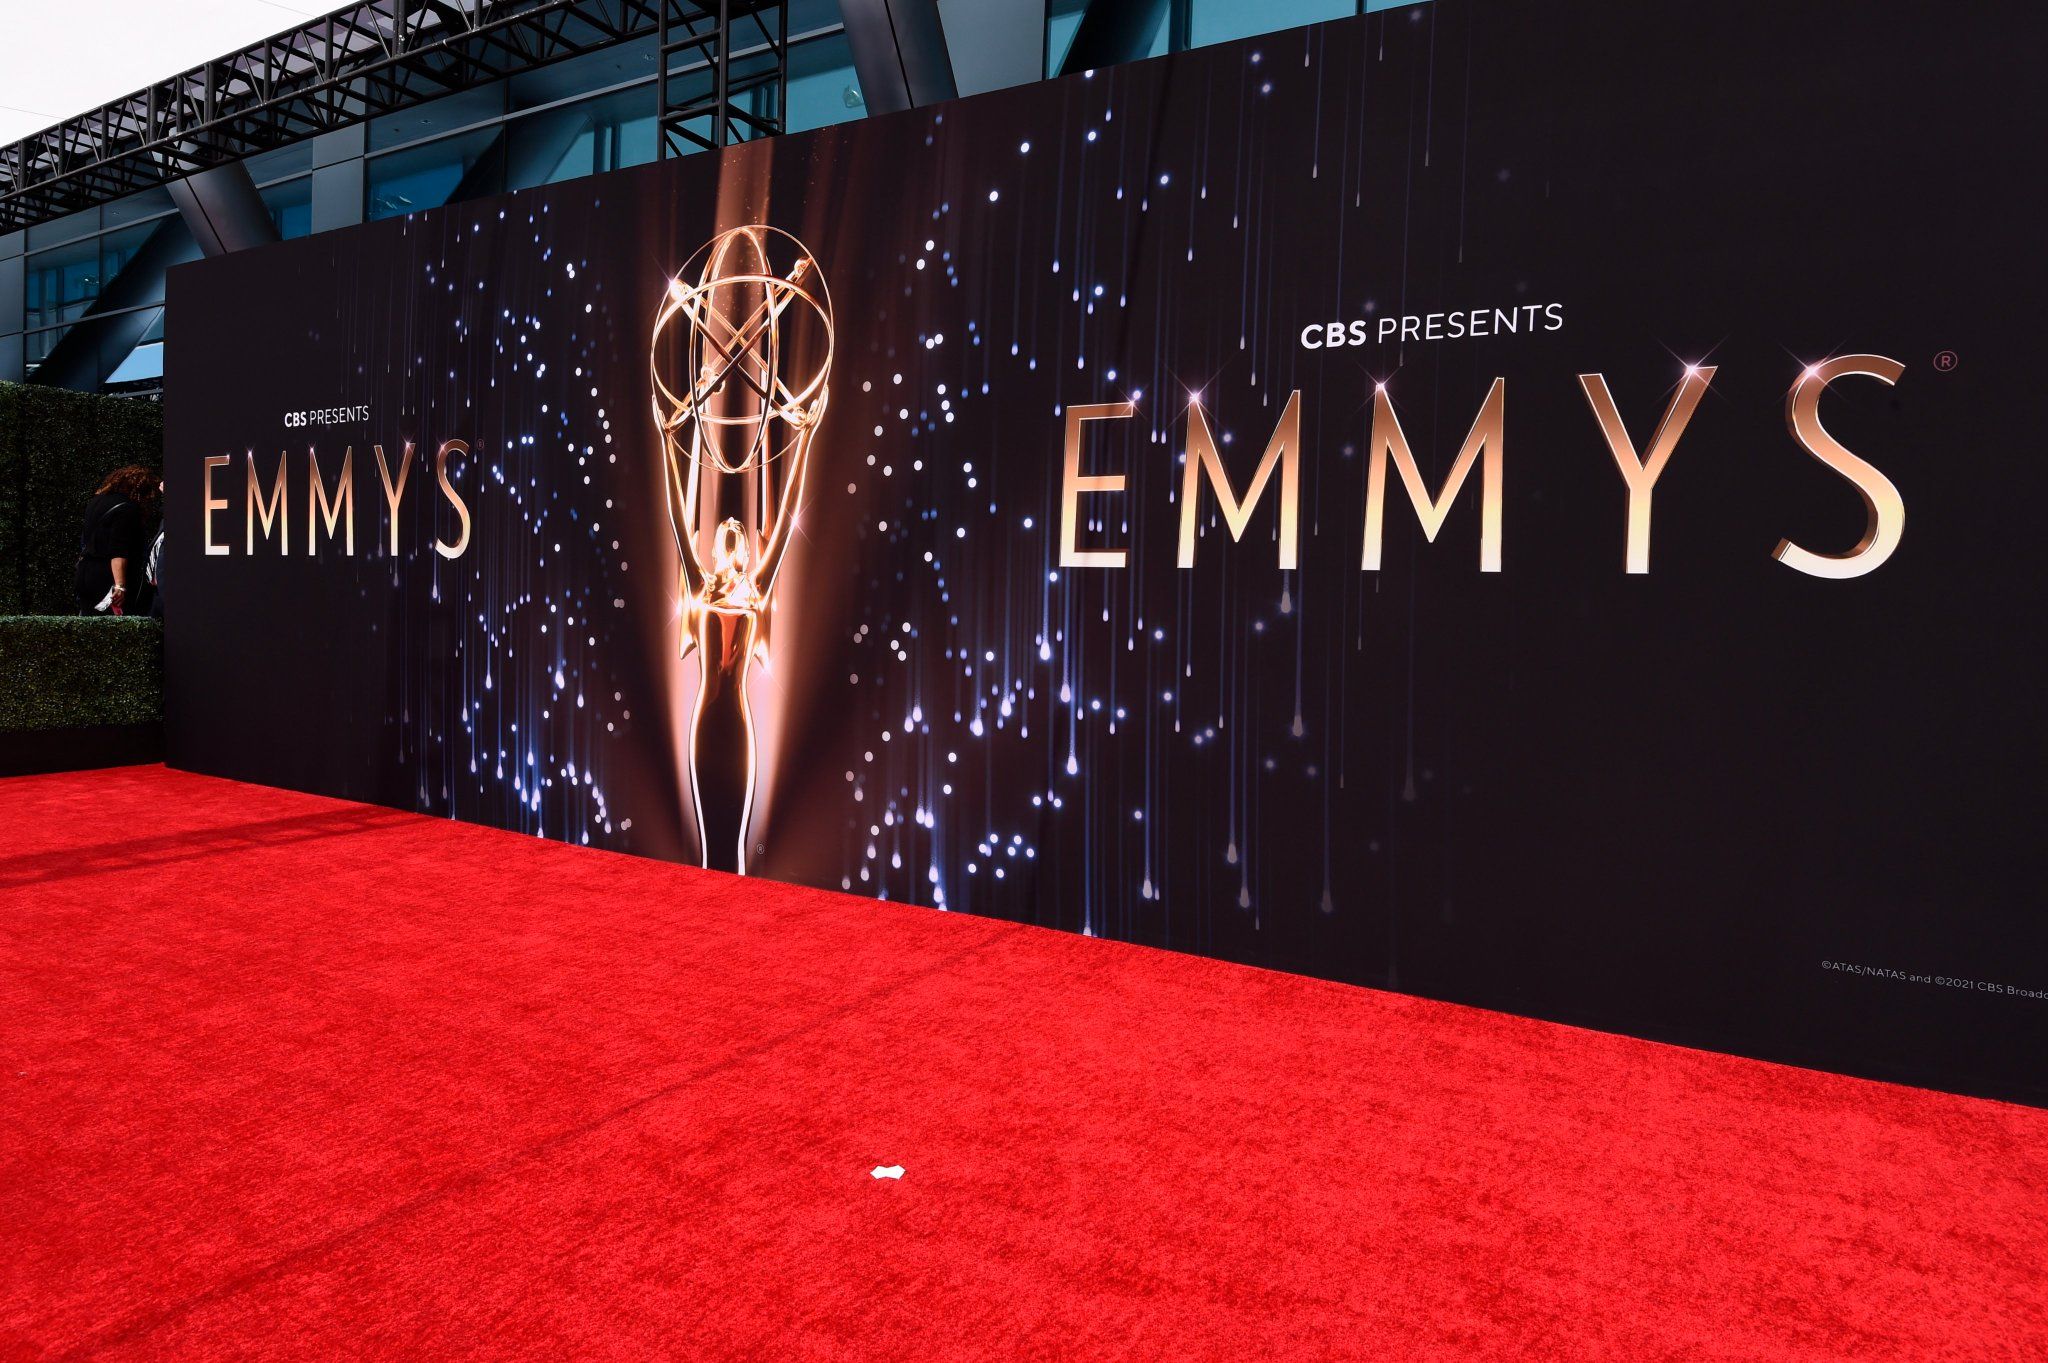 Emmys 2022 snubs Barry, Better Call Saul, among others